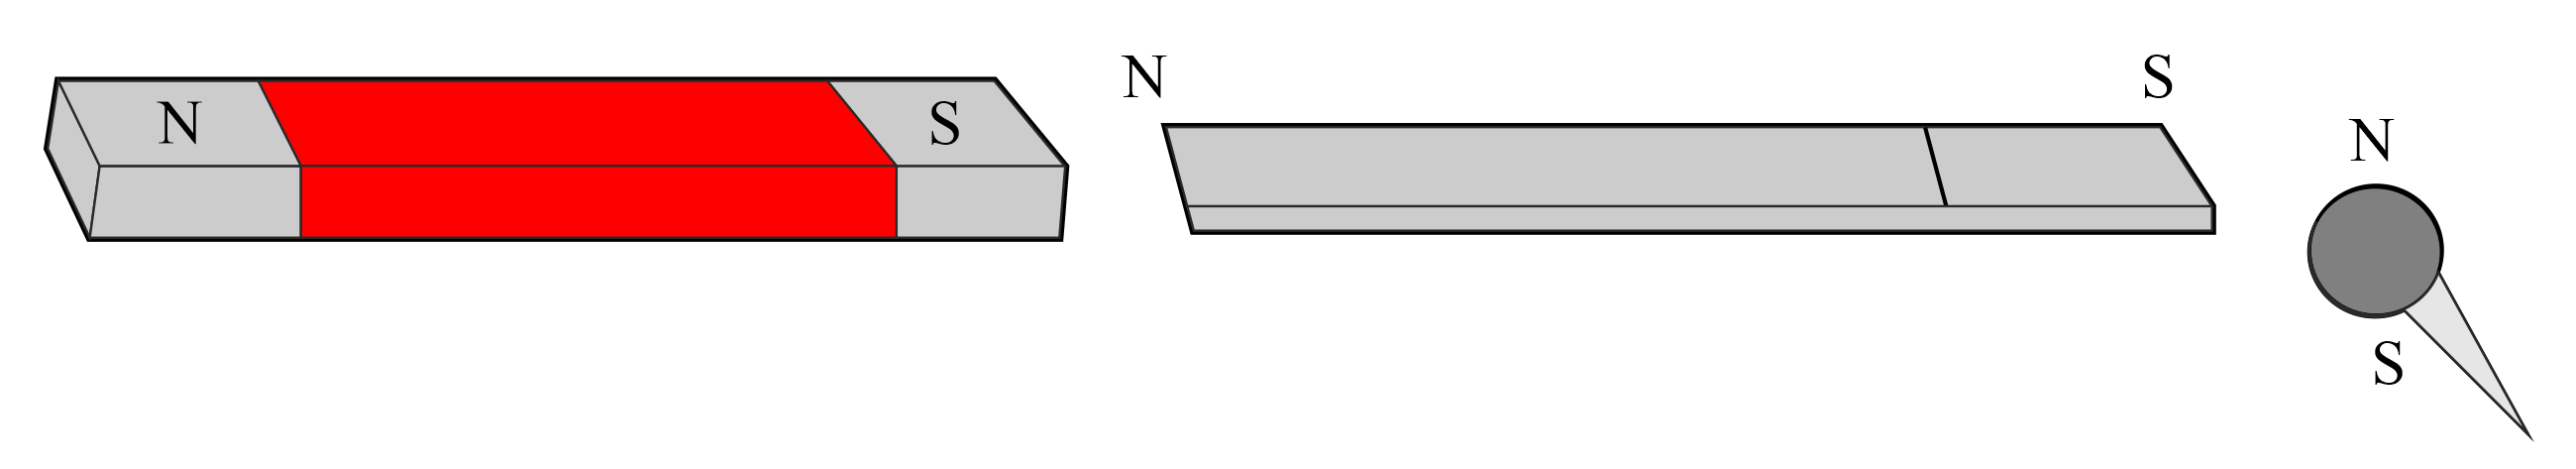 You are provided with two identical metal bars. One out of the two is a  magnet. Suggest two ways to identify the magnet.